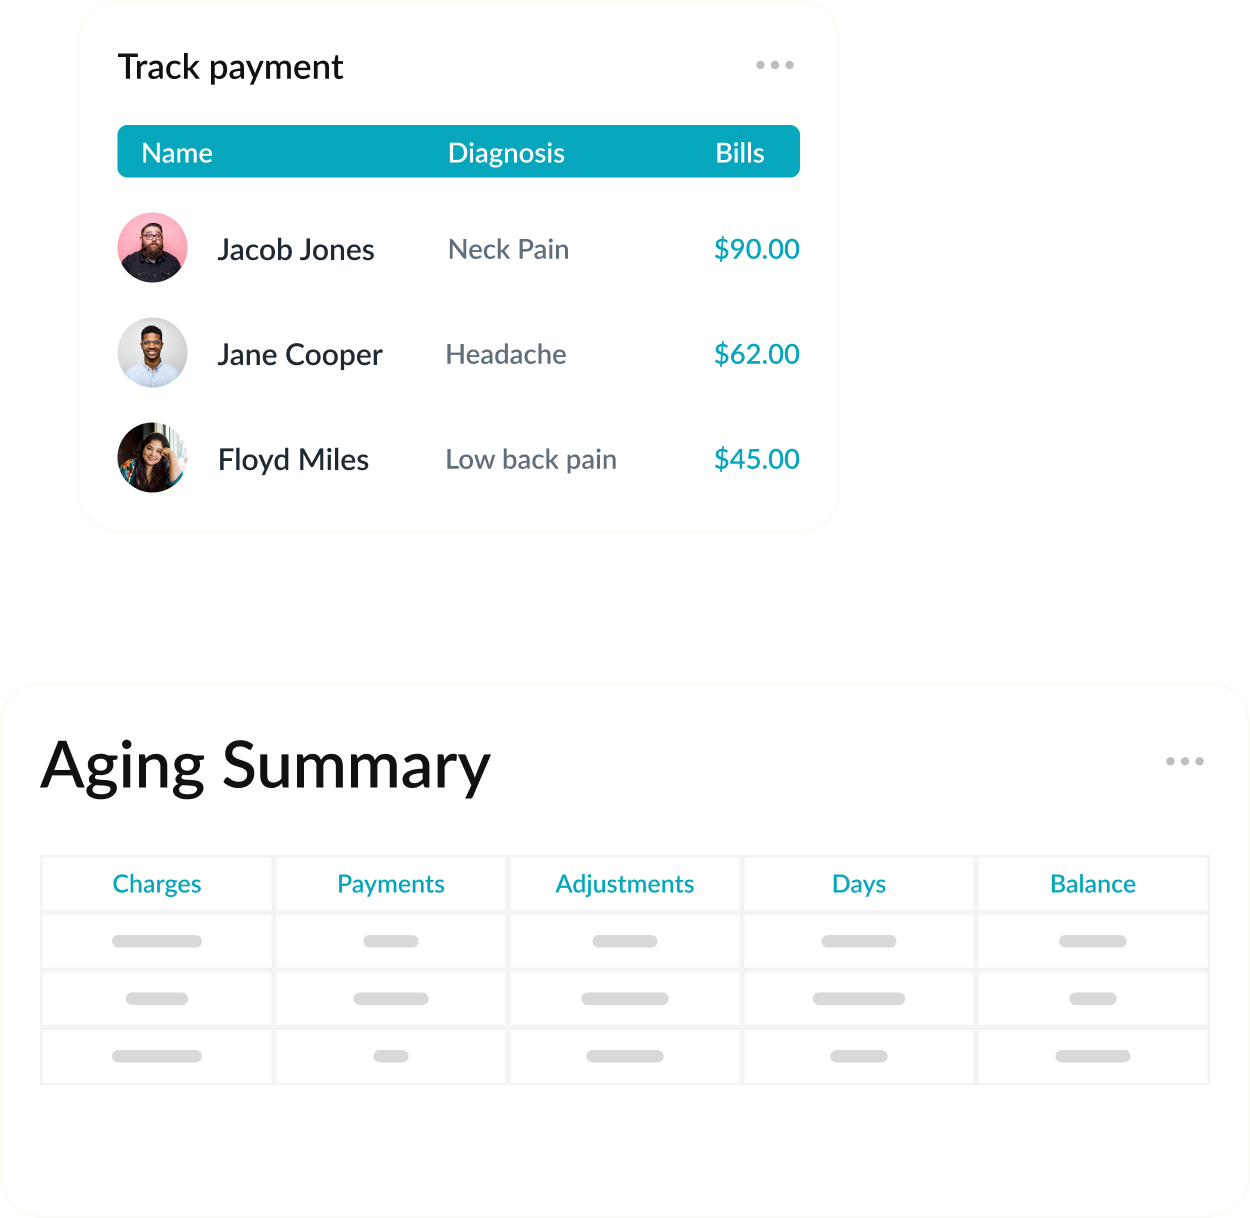 photo of webpt payment tracking with aging summary below